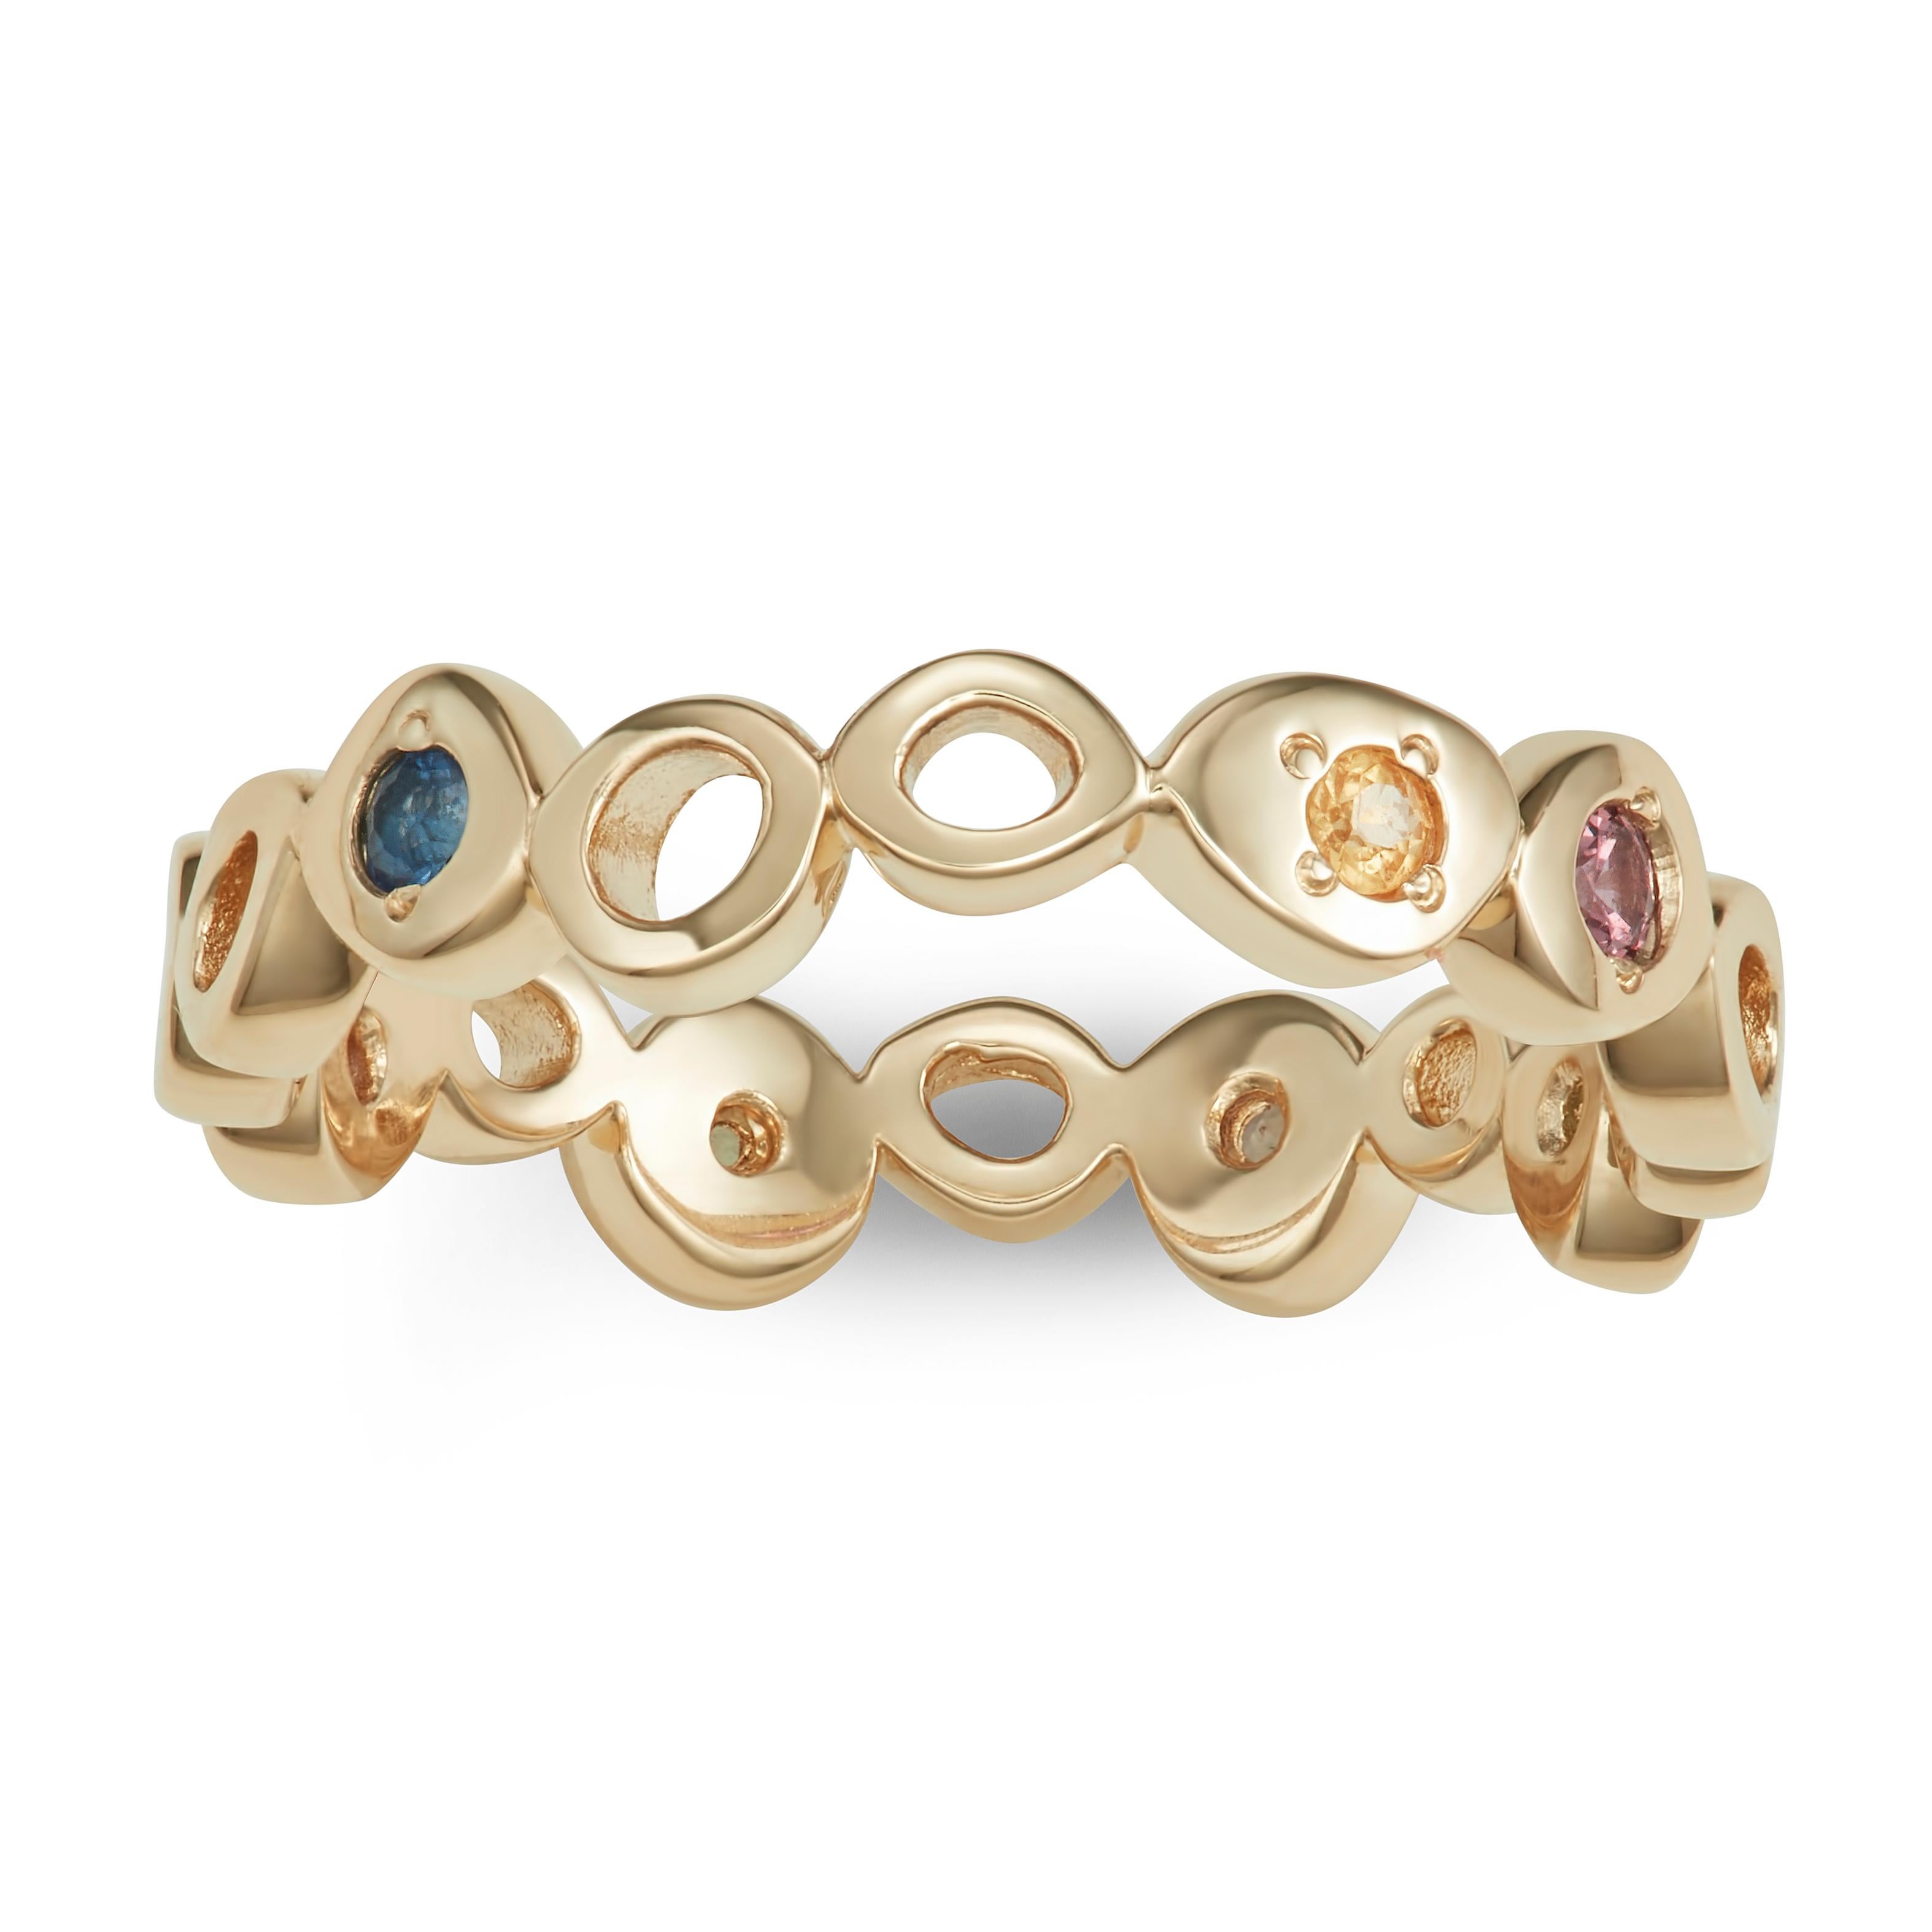 The perfect starter Hi June Parker ring has gotten a colorful makeover with
multi color sapphire stones sprinkled across the ring. Wear it alone or
stack with your favorite ring. 

Inspired by seeing the cross-section view of life, as if slicing a